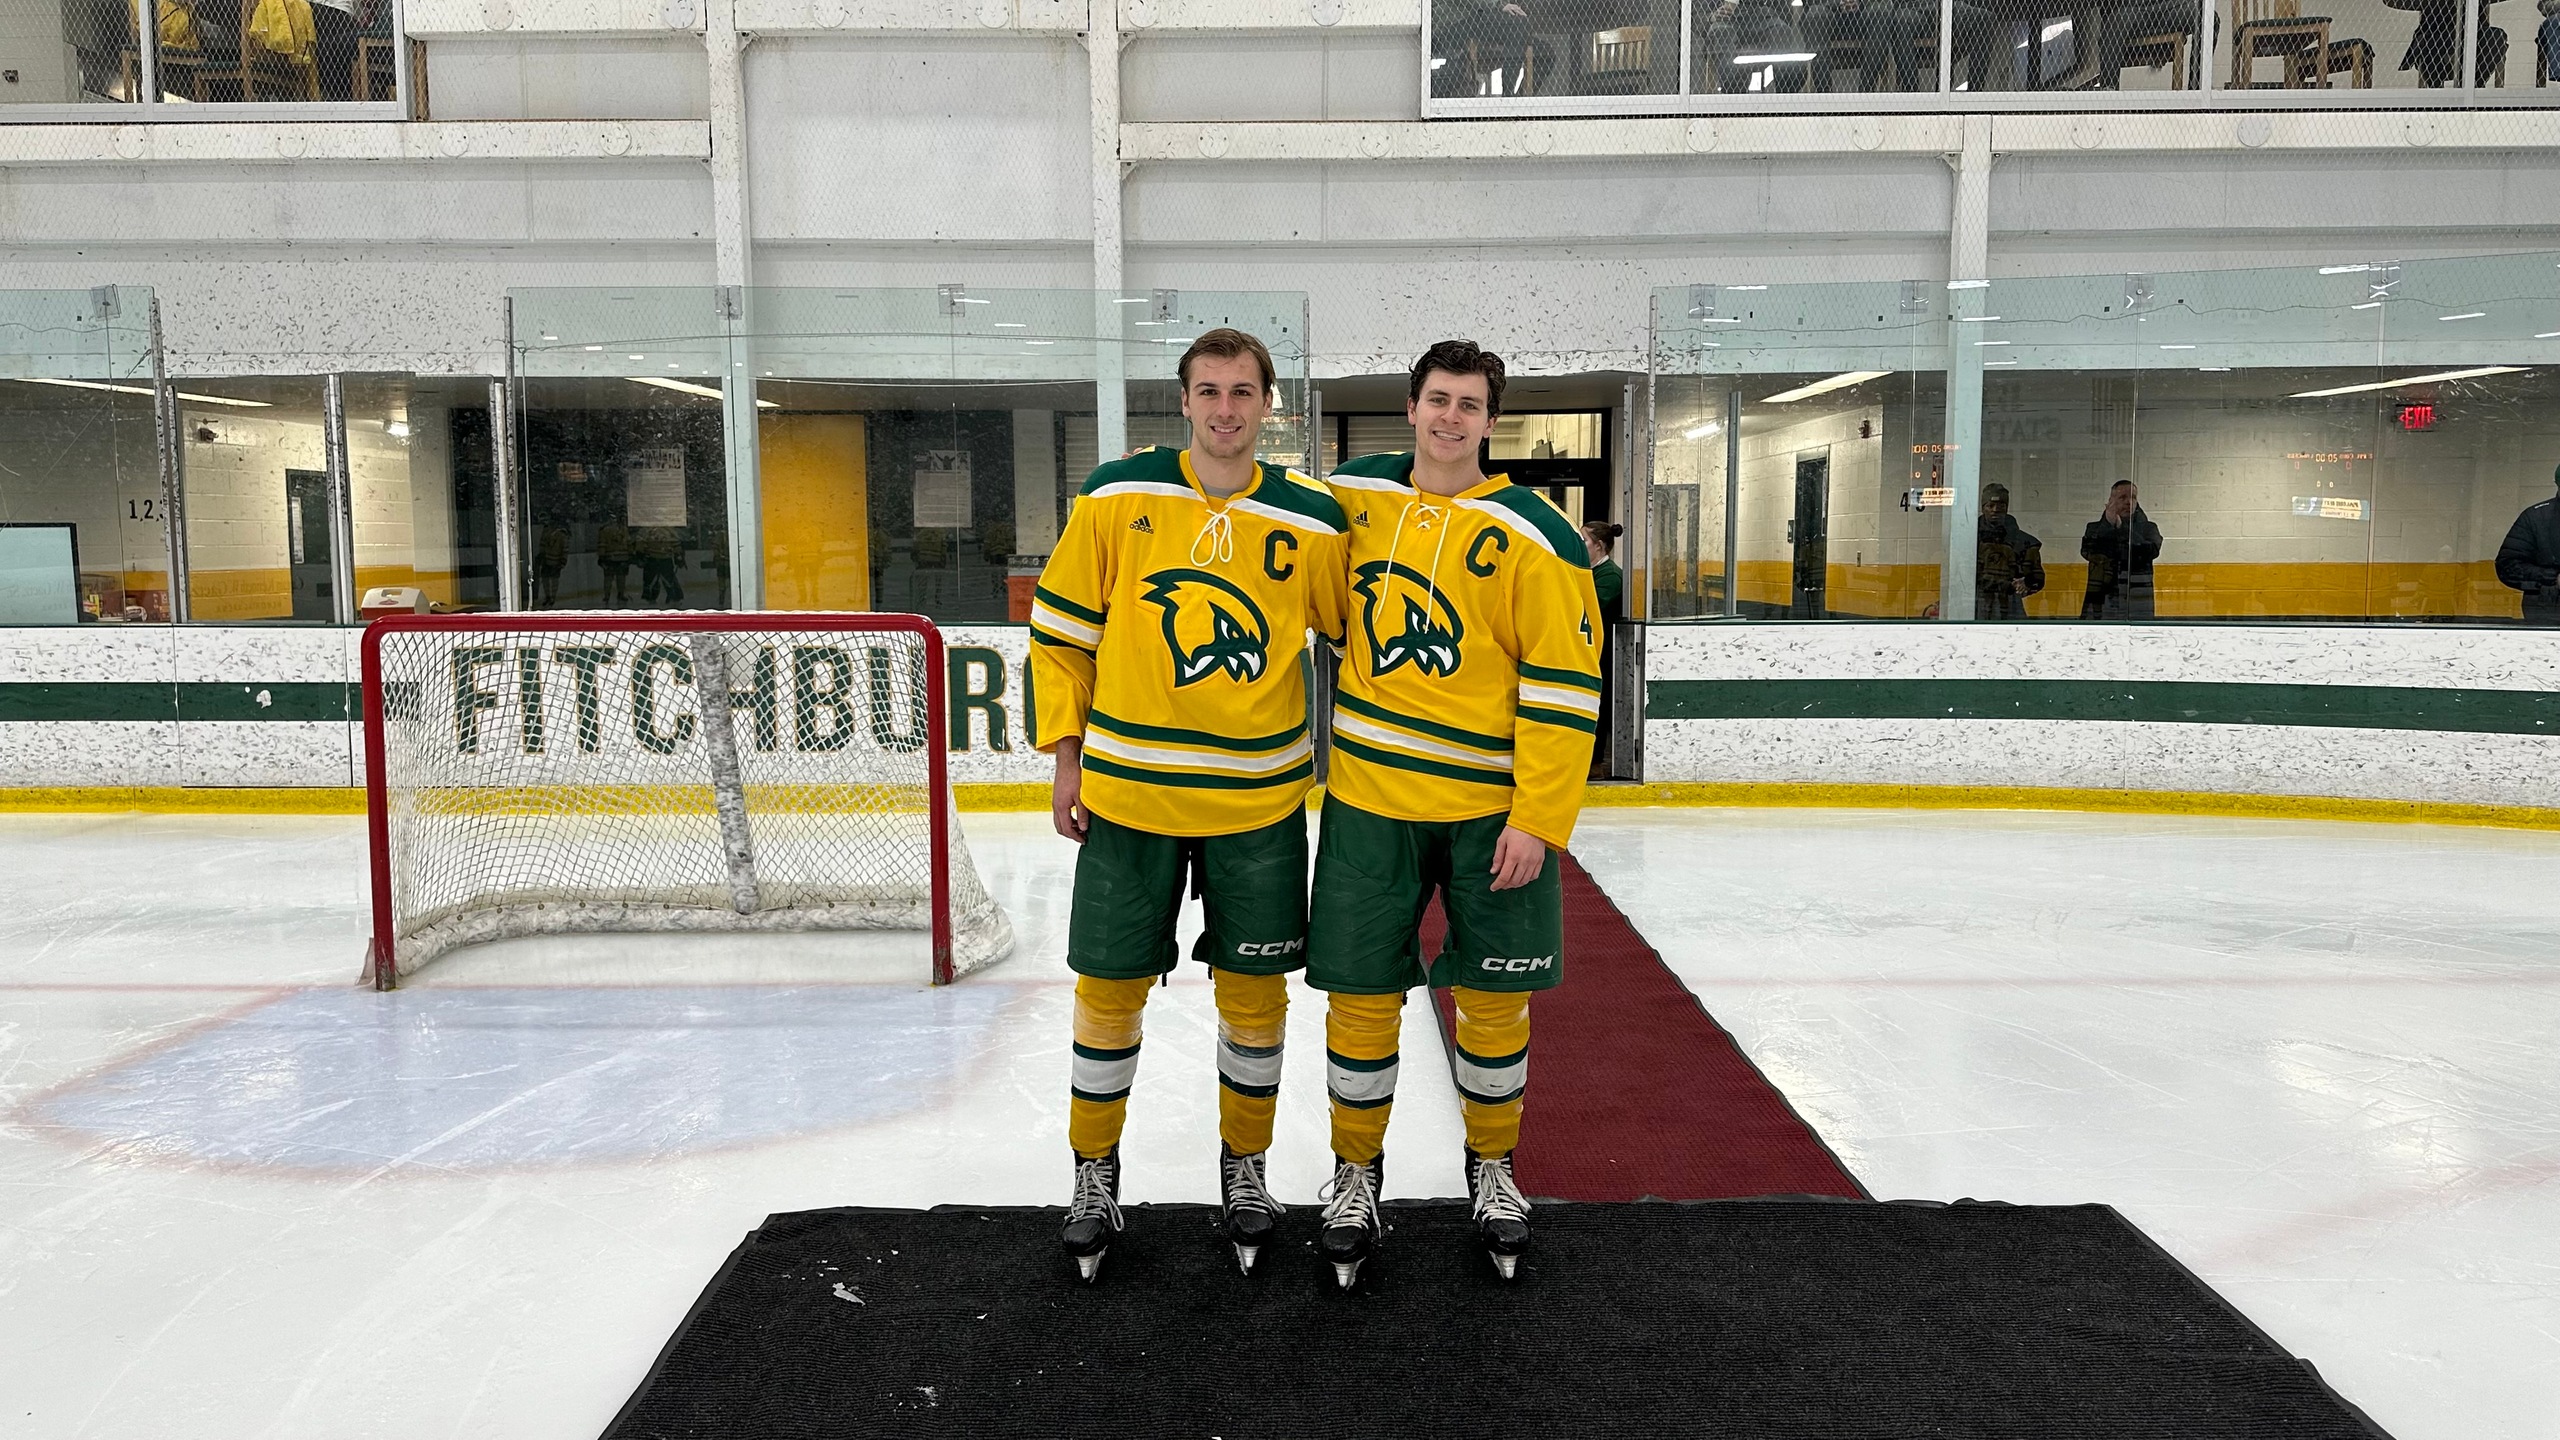 Ice Hockey Collects 3-1 Victory Over Lancers On Senior Day